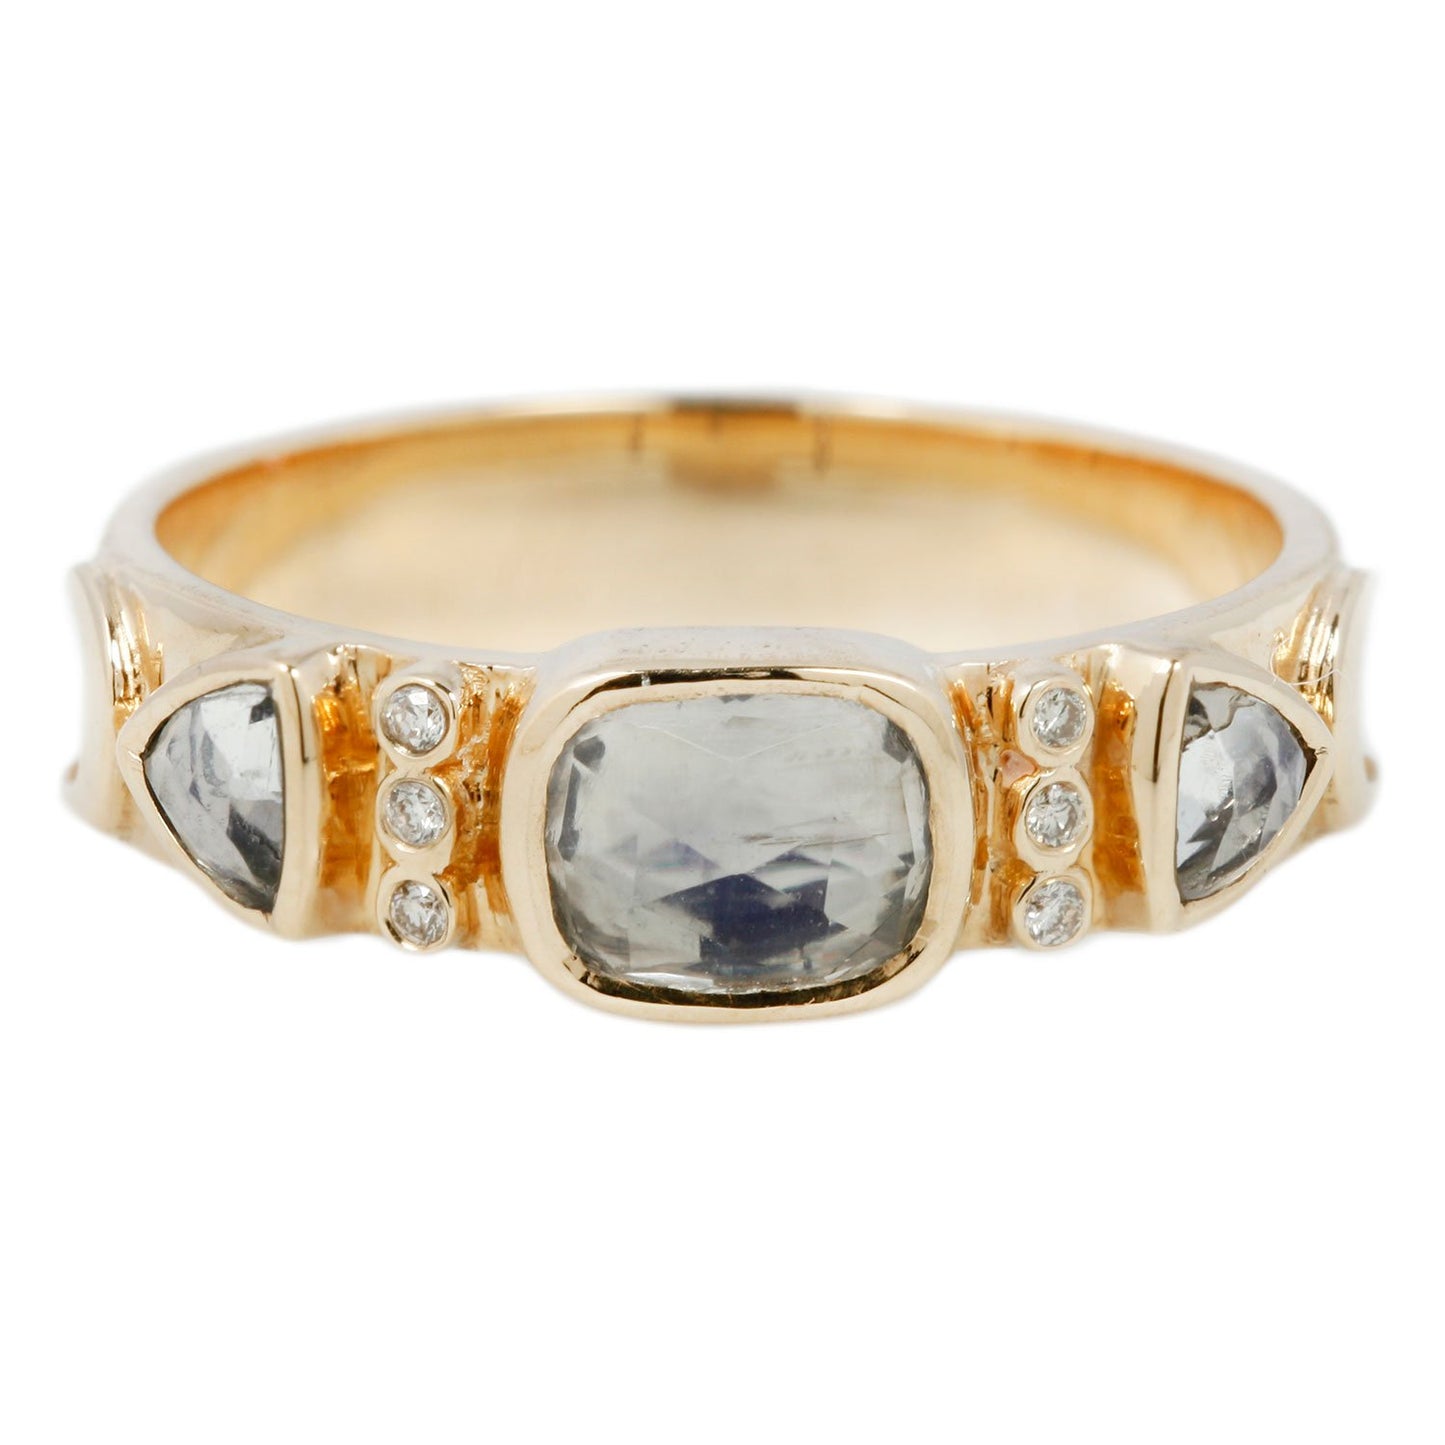 Celine D'Aoust Moonstone and Diamond Crescent Totem Ring